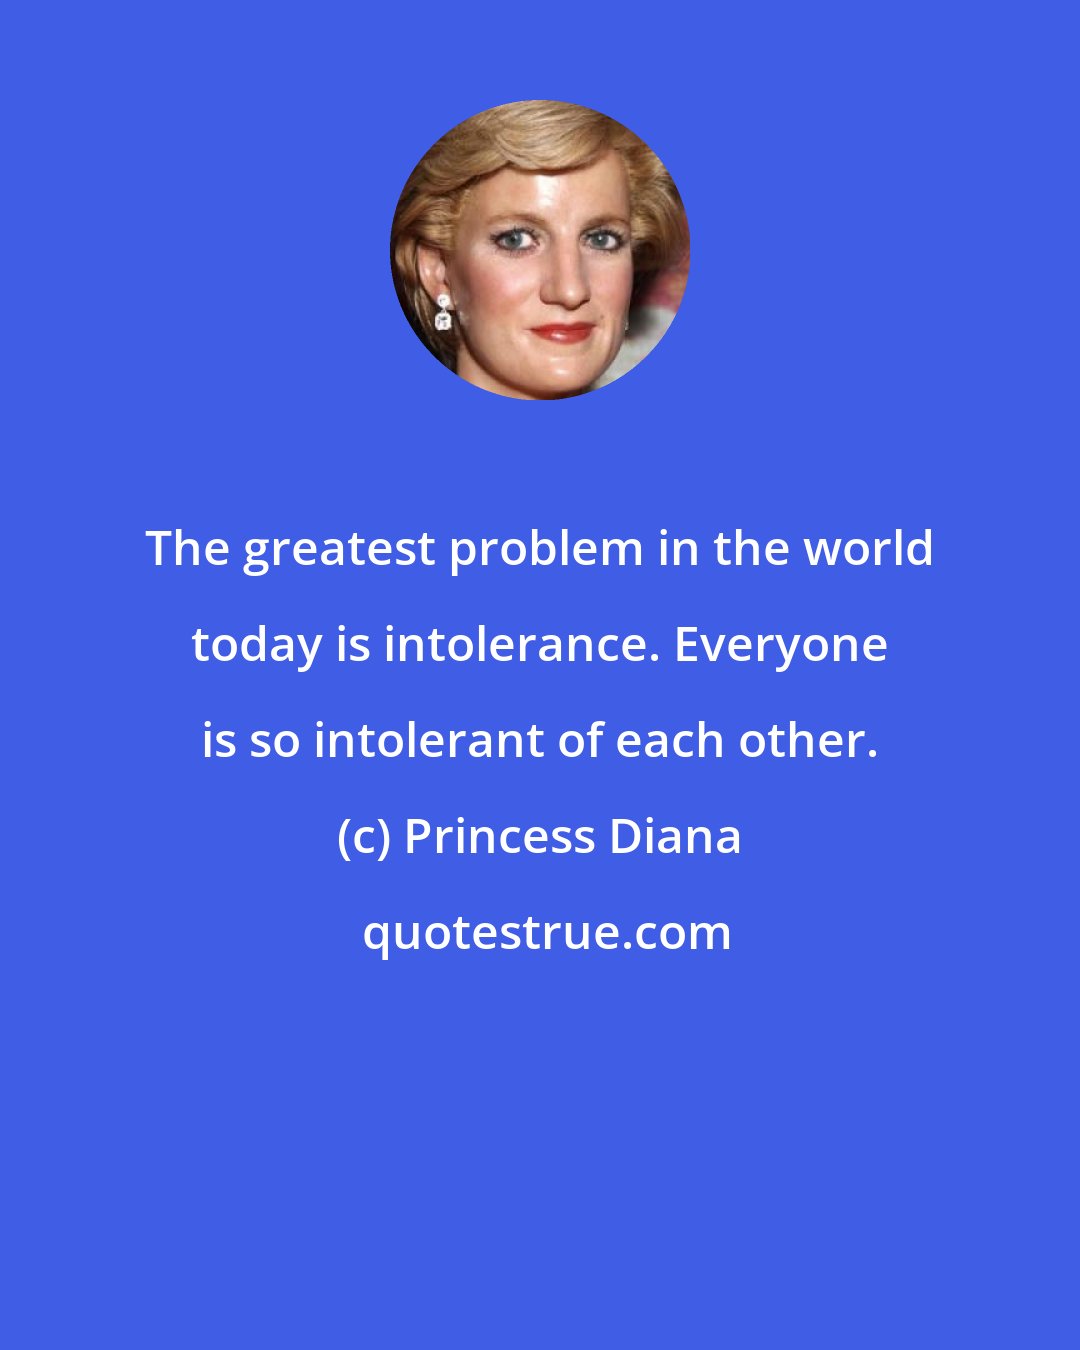 Princess Diana: The greatest problem in the world today is intolerance. Everyone is so intolerant of each other.